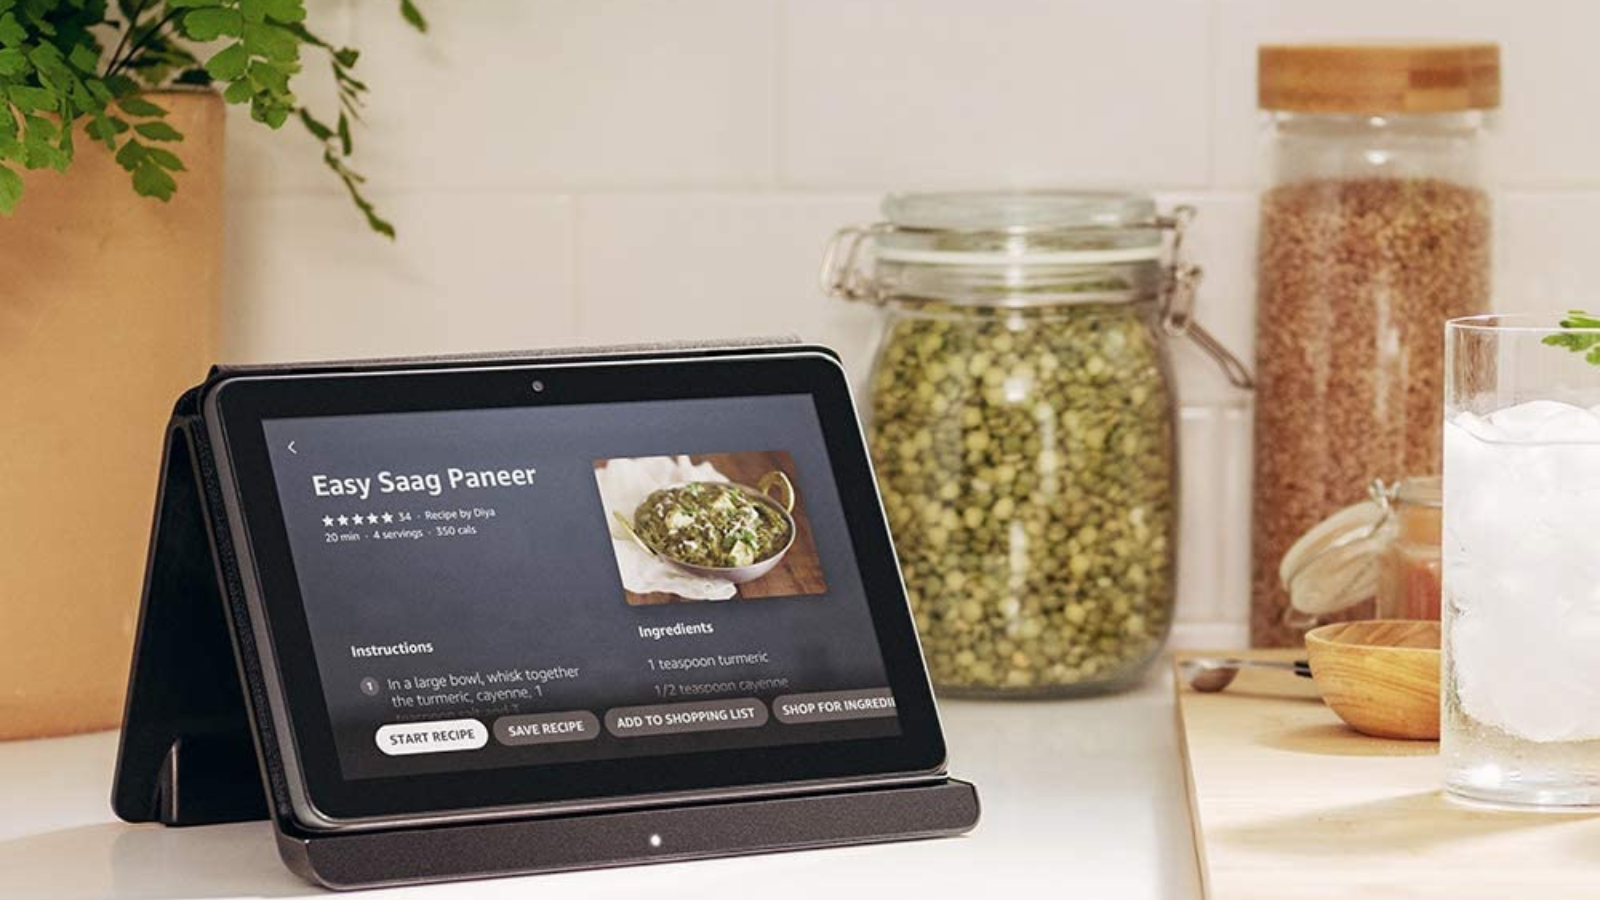 amazon fire hd 8 plus tablet sitting on kitchen counter next to jars of spices